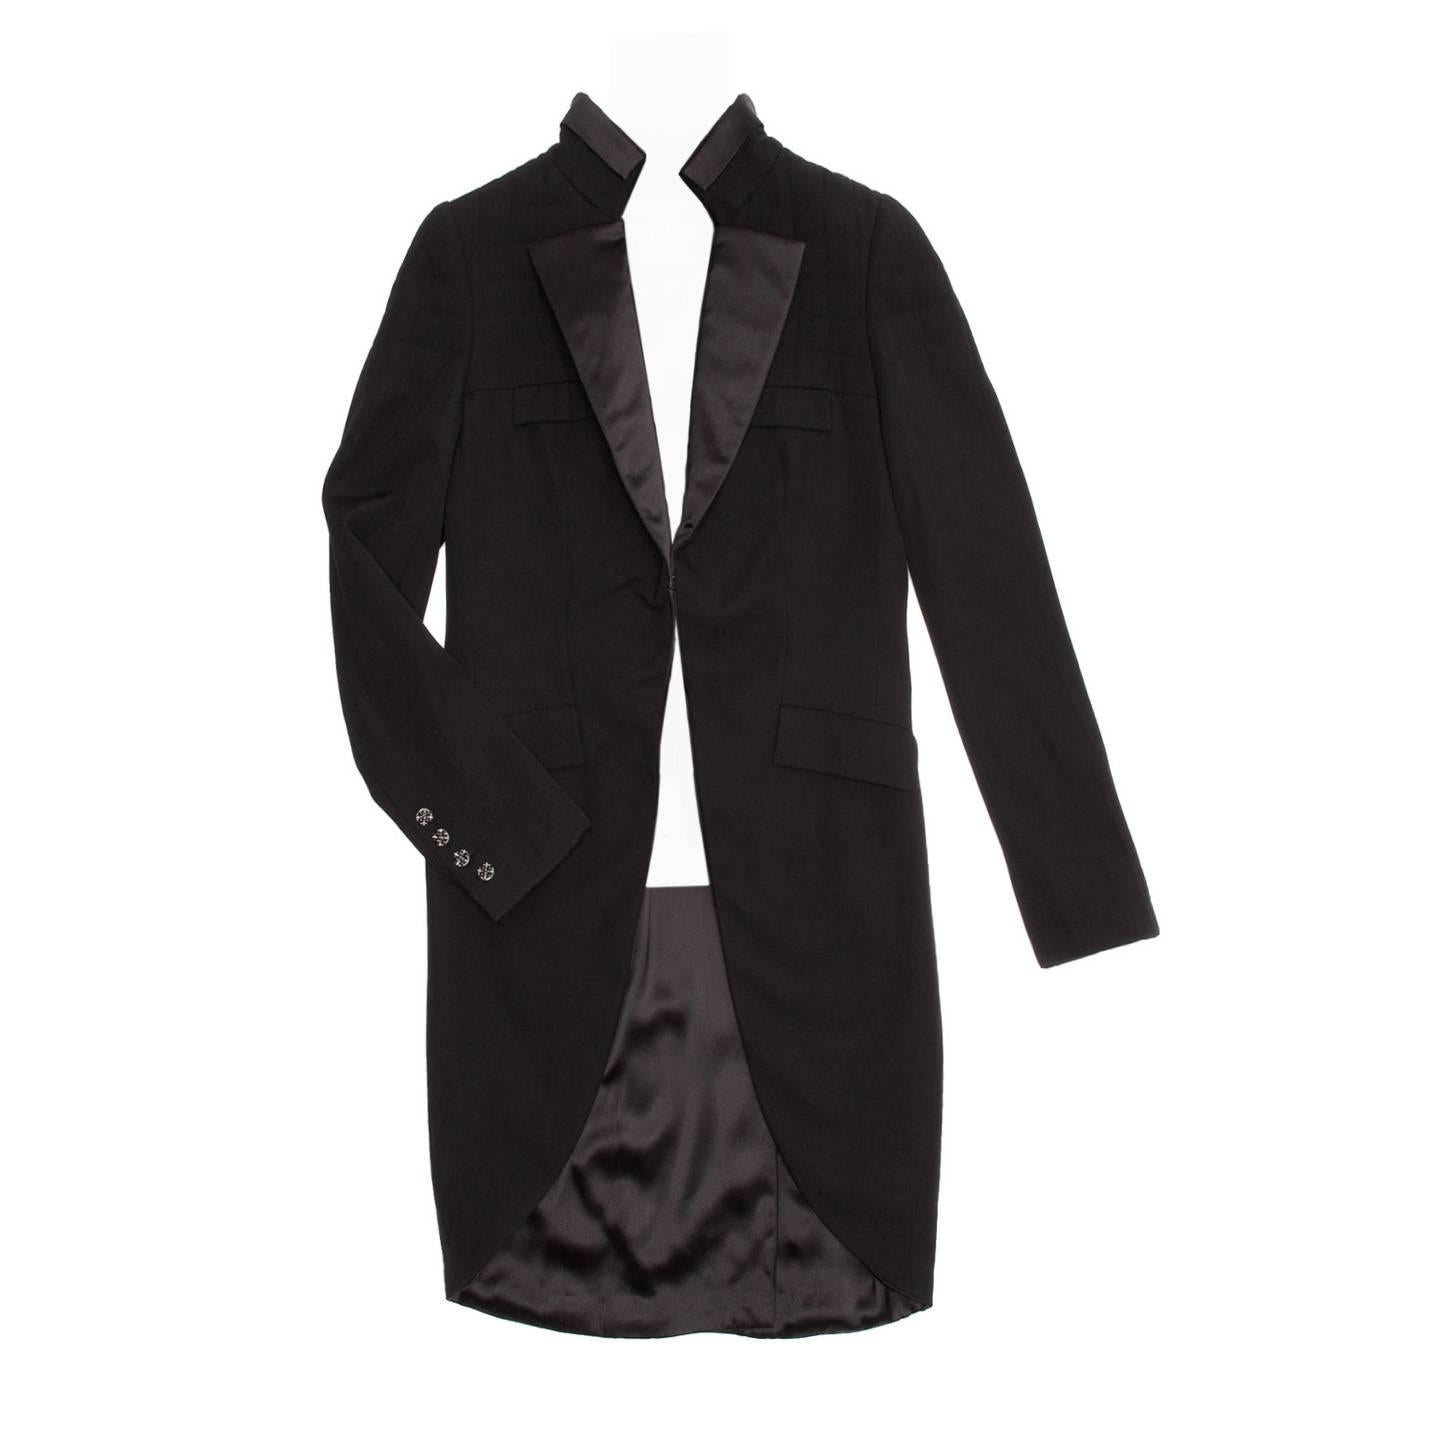 Chanel Black Tuxedo Jacket With Tails For Sale